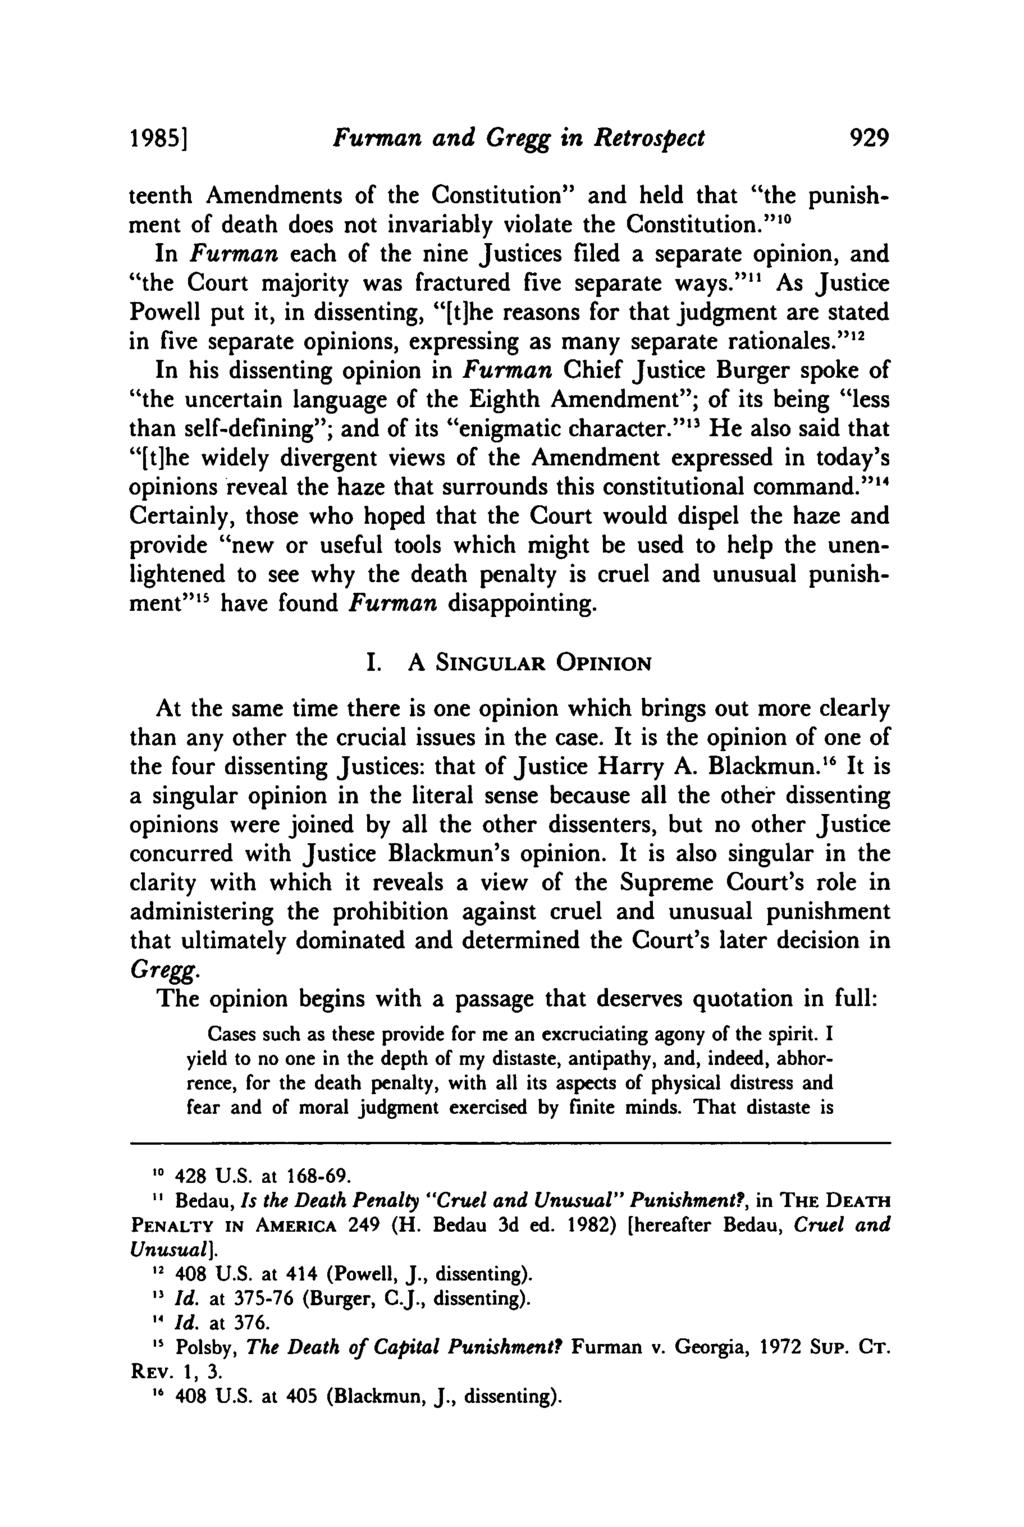 1985] Furman and Gregg in Retrospect teenth Amendments of the Constitution" and held that "the punishment of death does not invariably violate the Constitution.